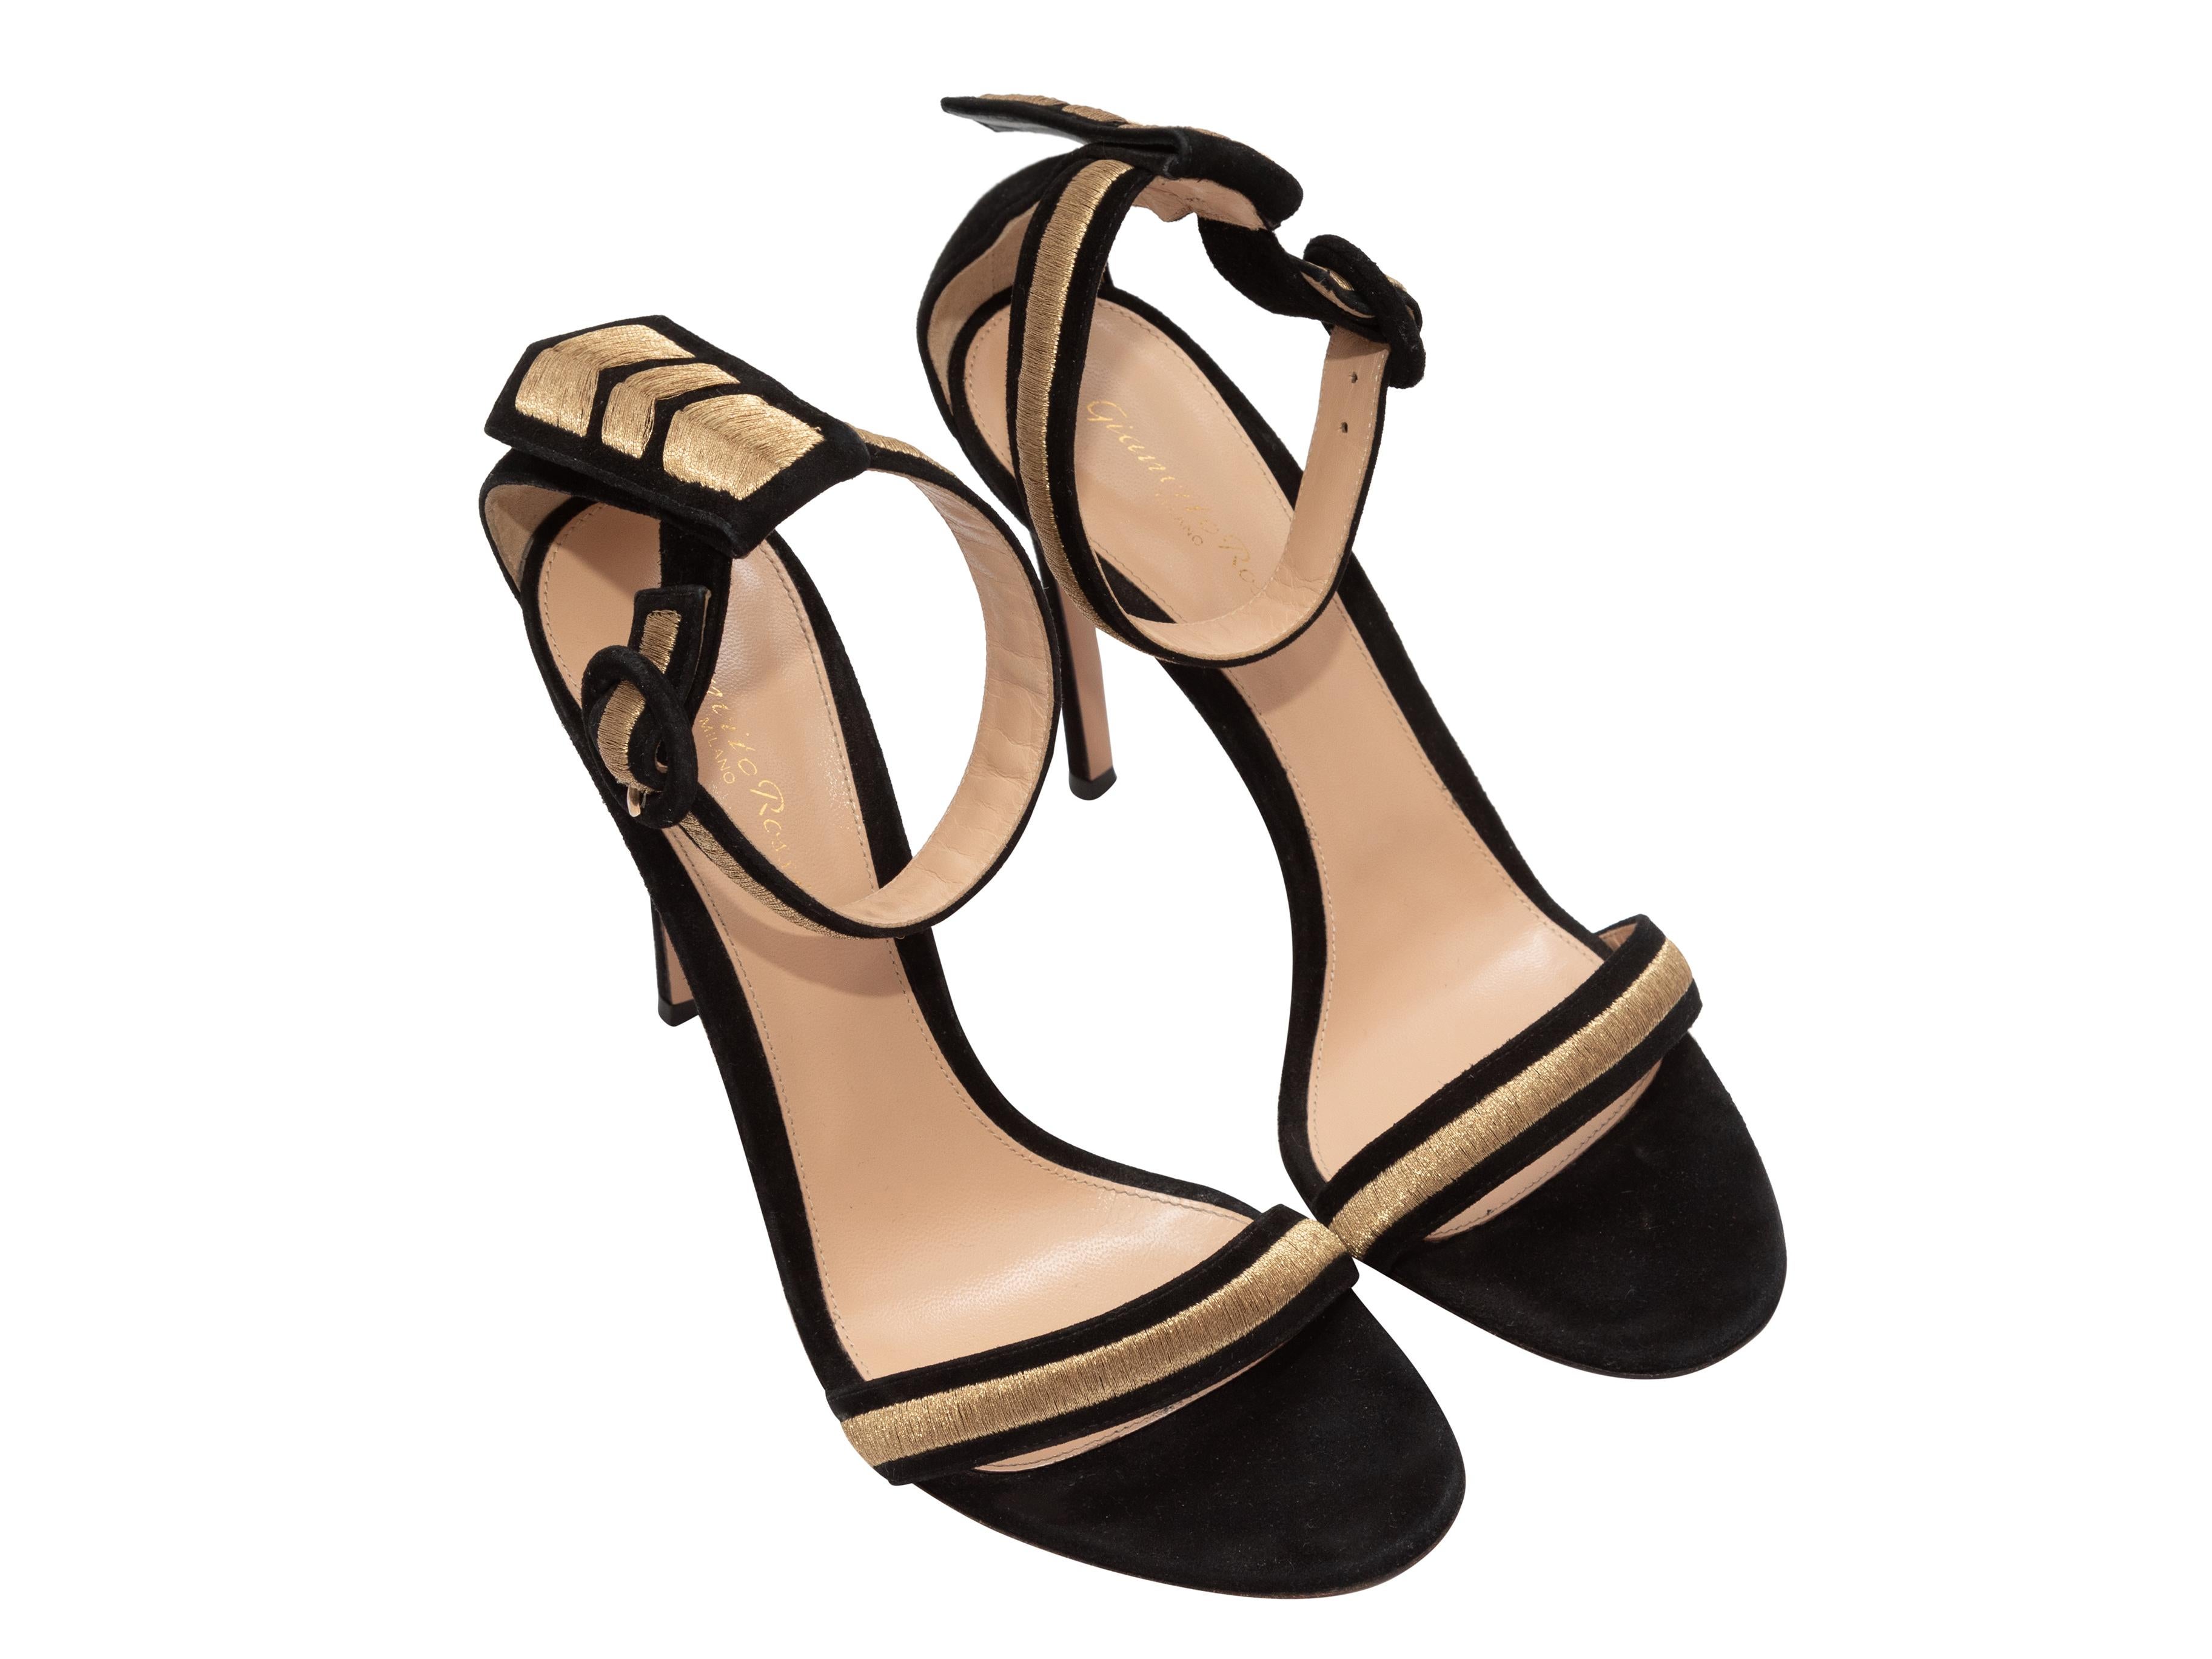 Gianvito Rossi Black & Gold Suede Heeled Sandals In Good Condition For Sale In New York, NY